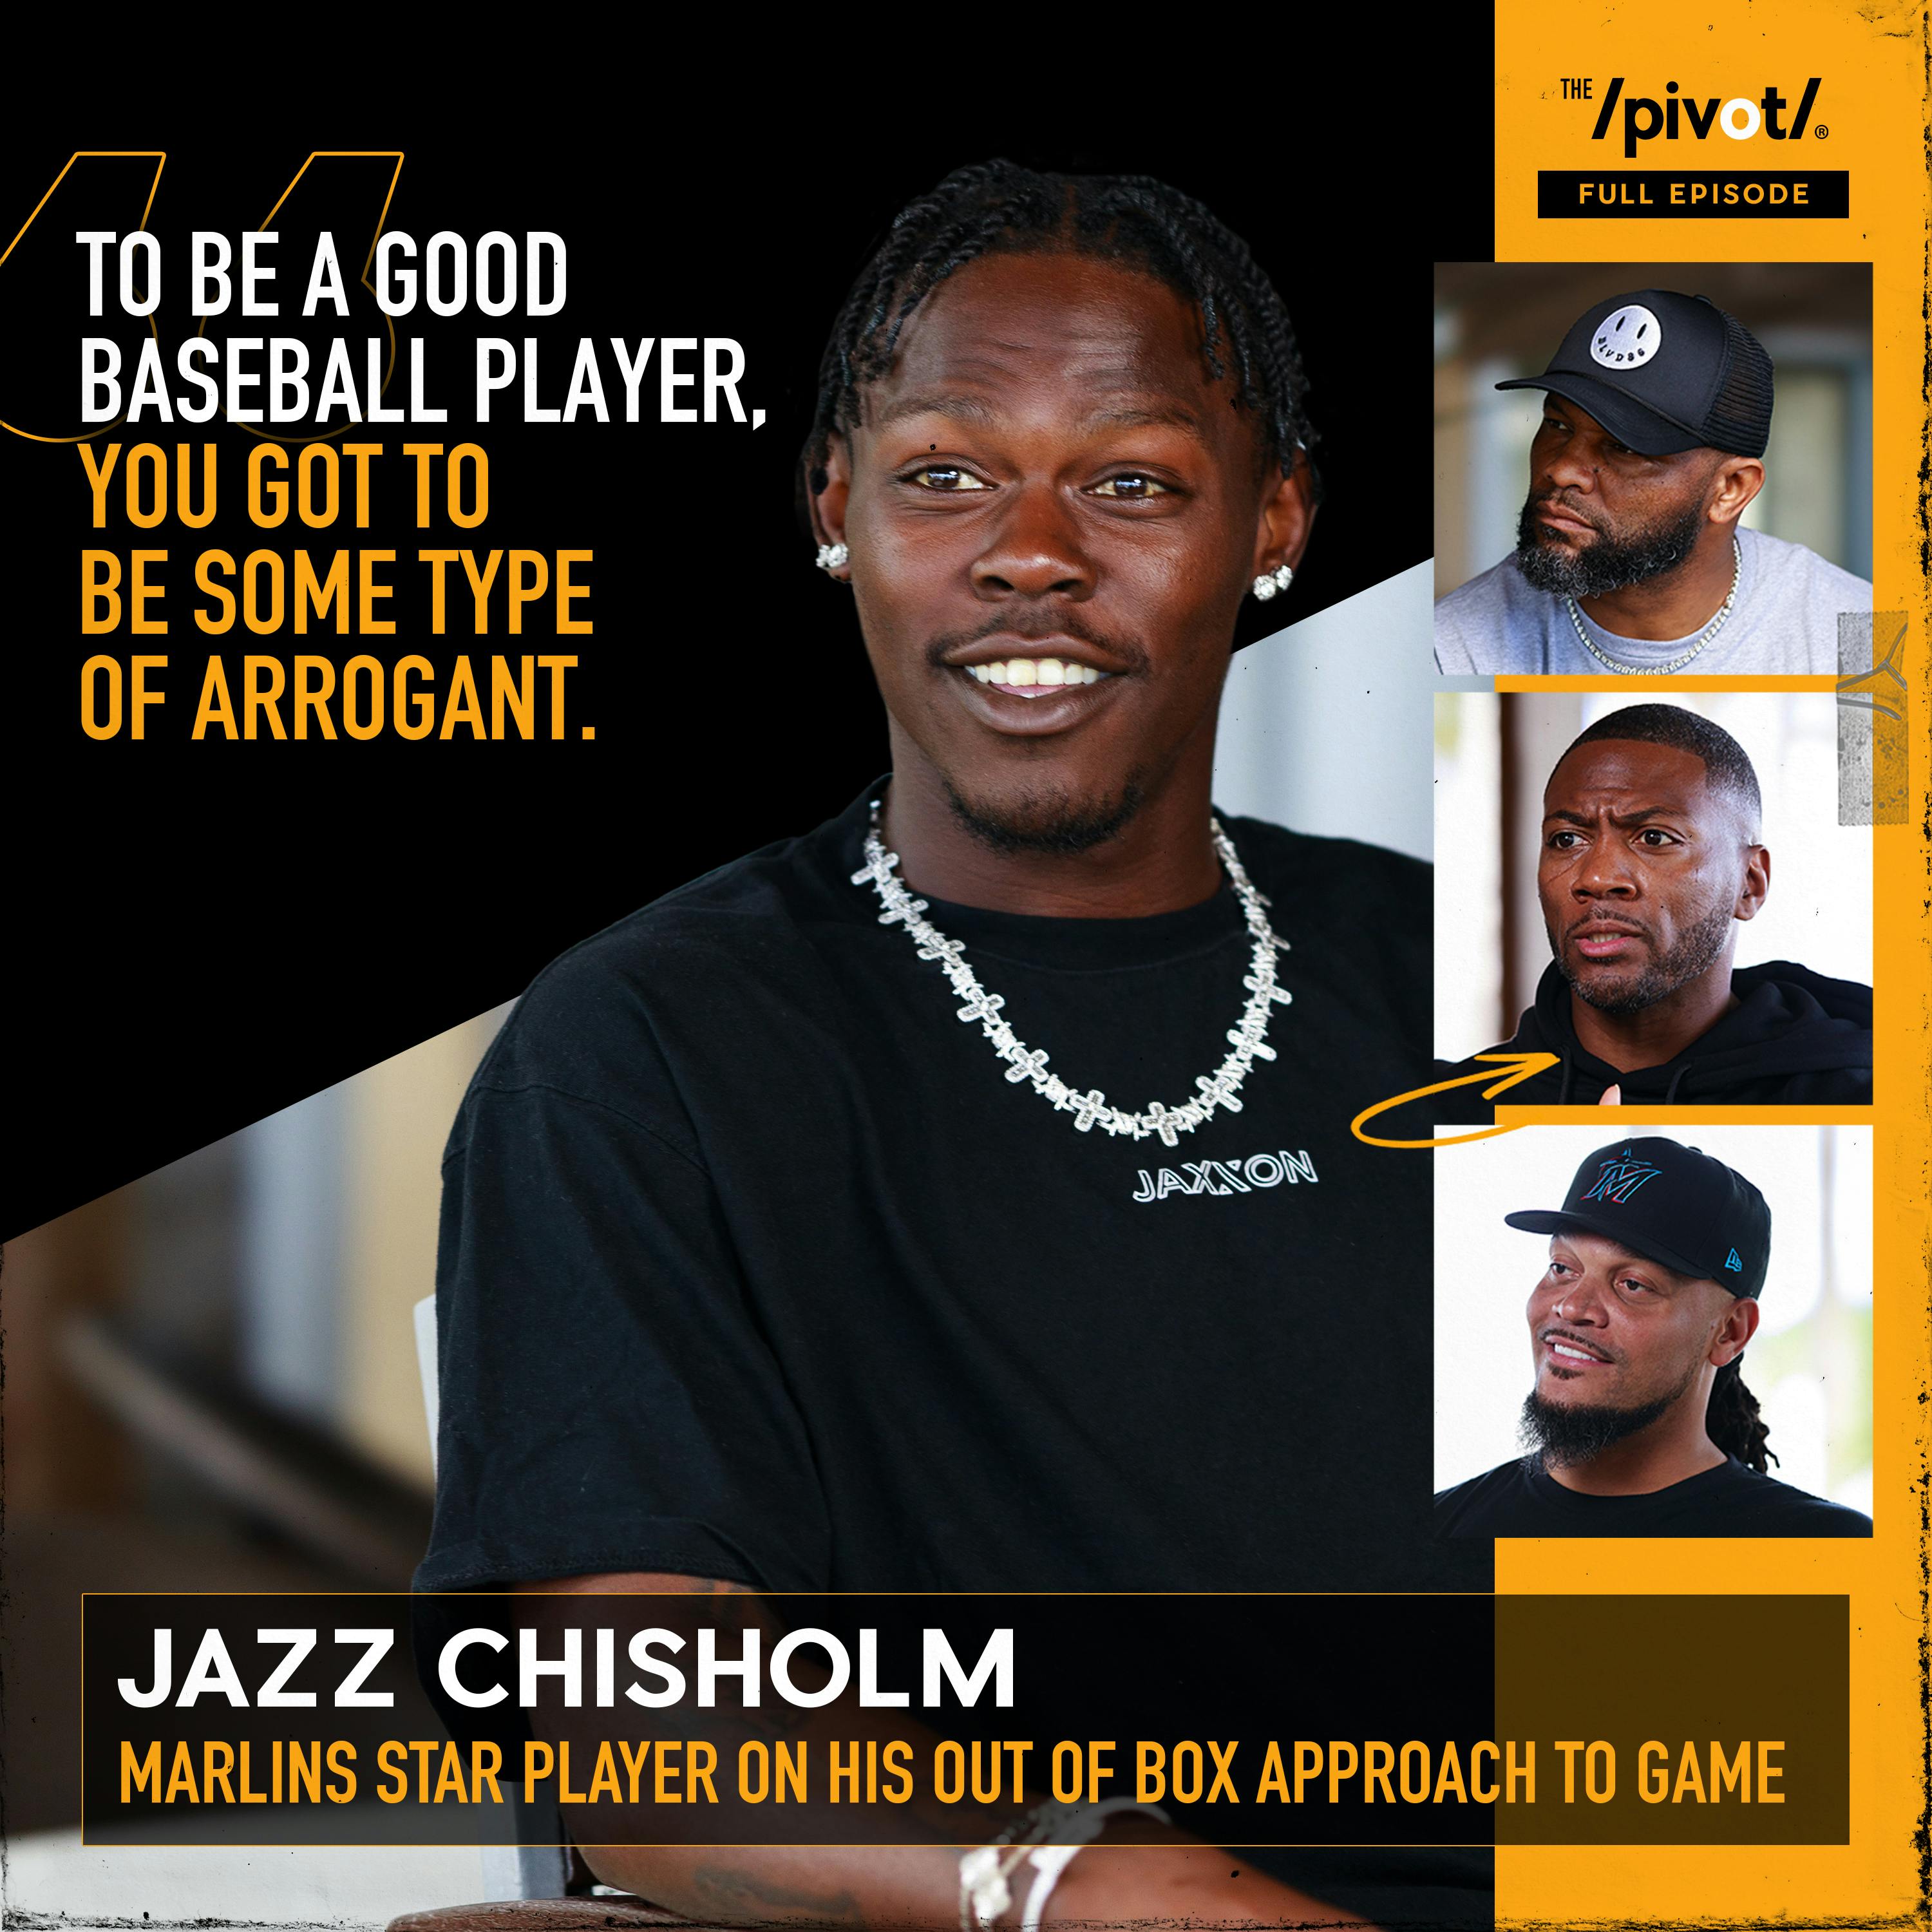 Jazz Chisholm Marlins Captain and MLB All Star talks his unapologetic approach to baseball, tough journey in the big leagues, relationship with Derek Jeter, life changing moment with Kobe Bryant and w